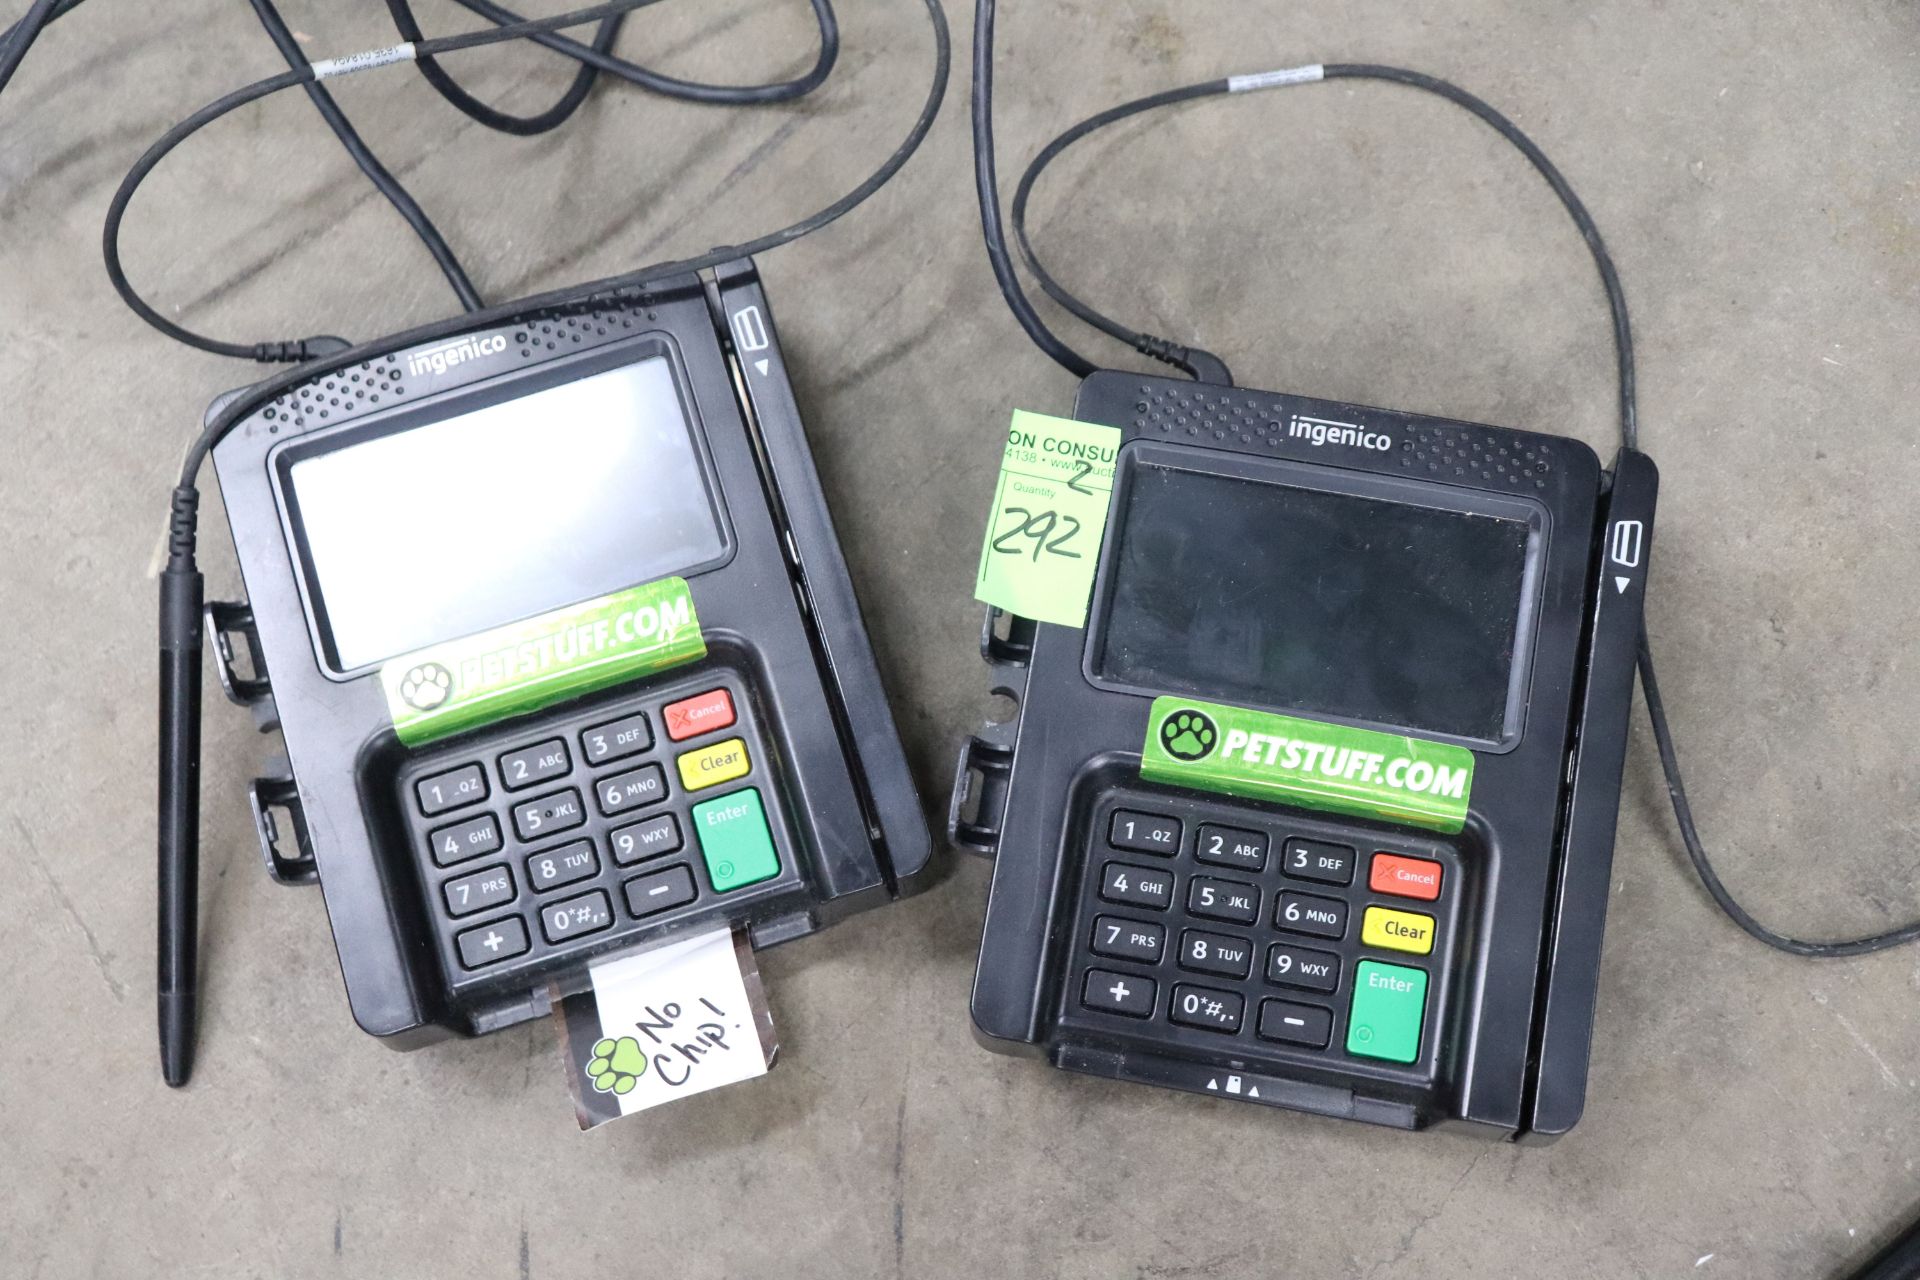 Two Ingenico payment terminals, model ISC250-01T2394C